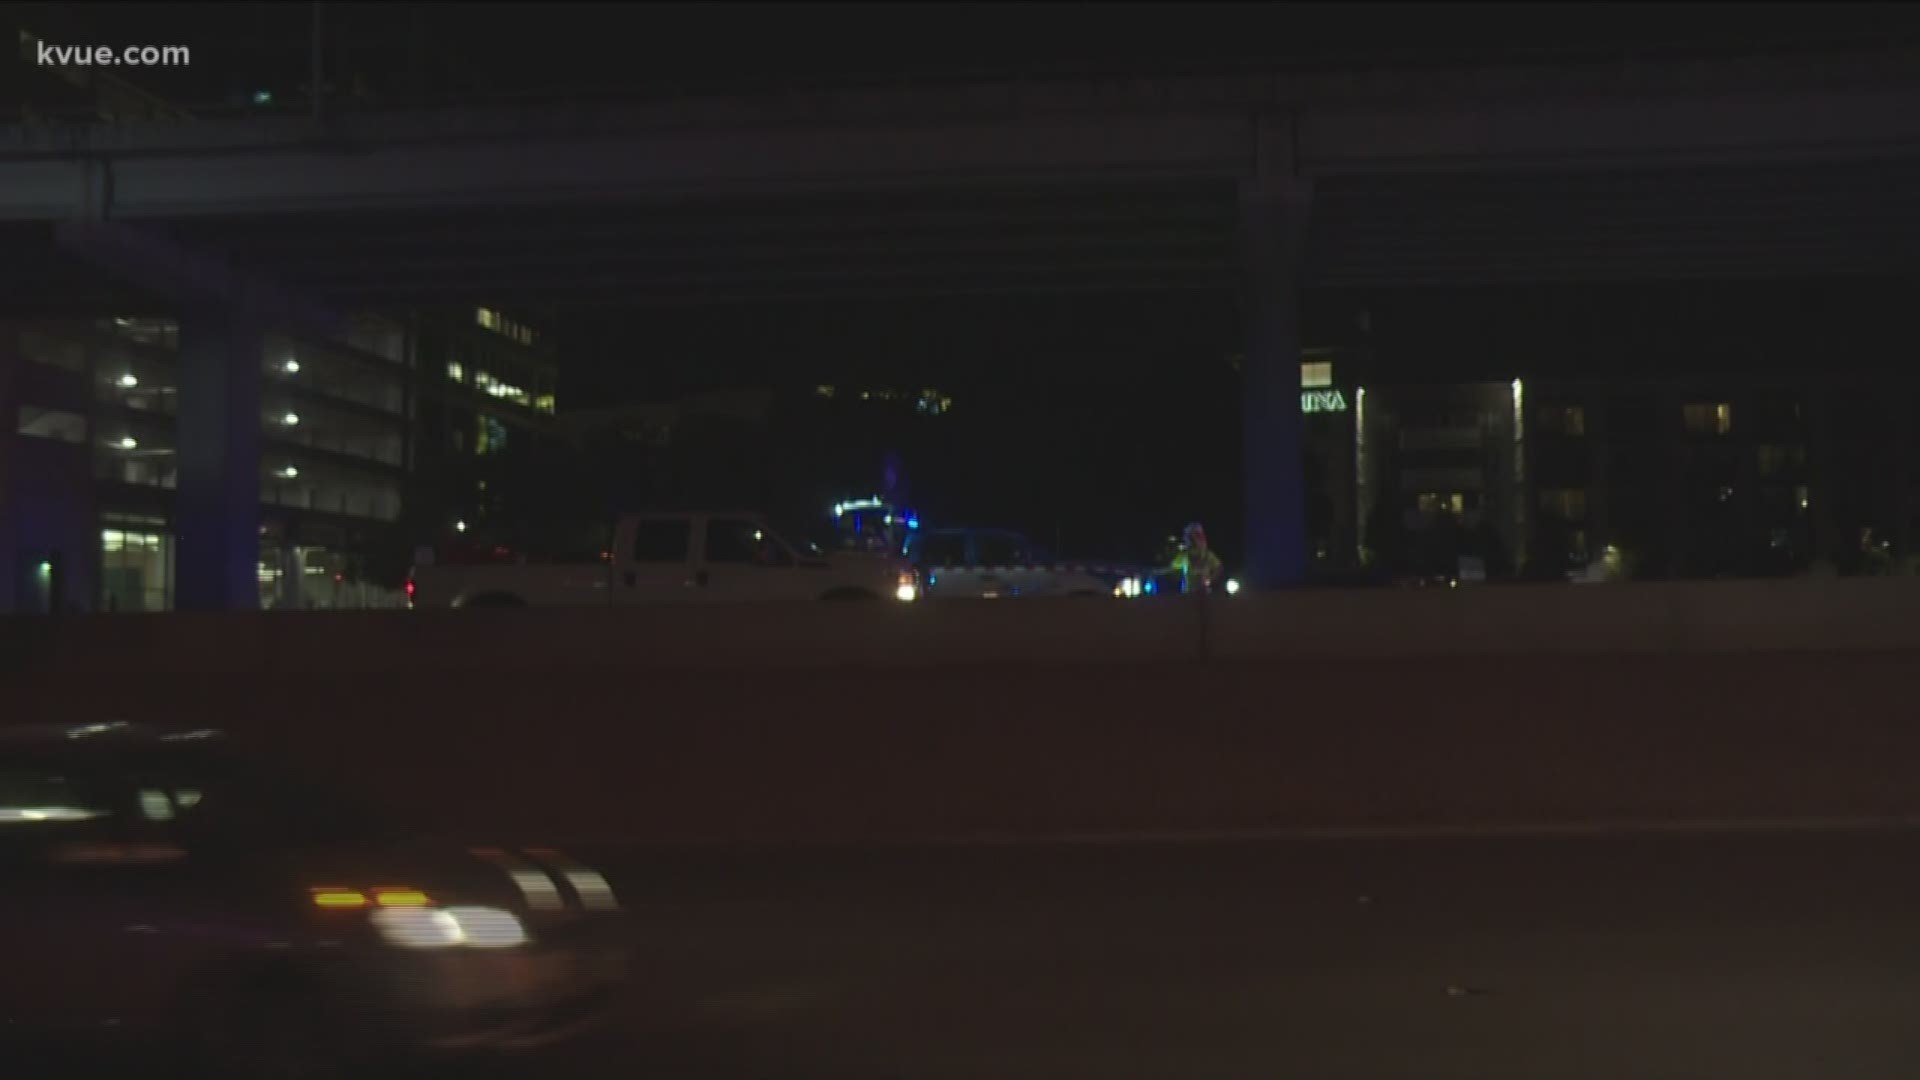 Debris on the lower deck of I-35 shut down an area of the highway on Tuesday night.